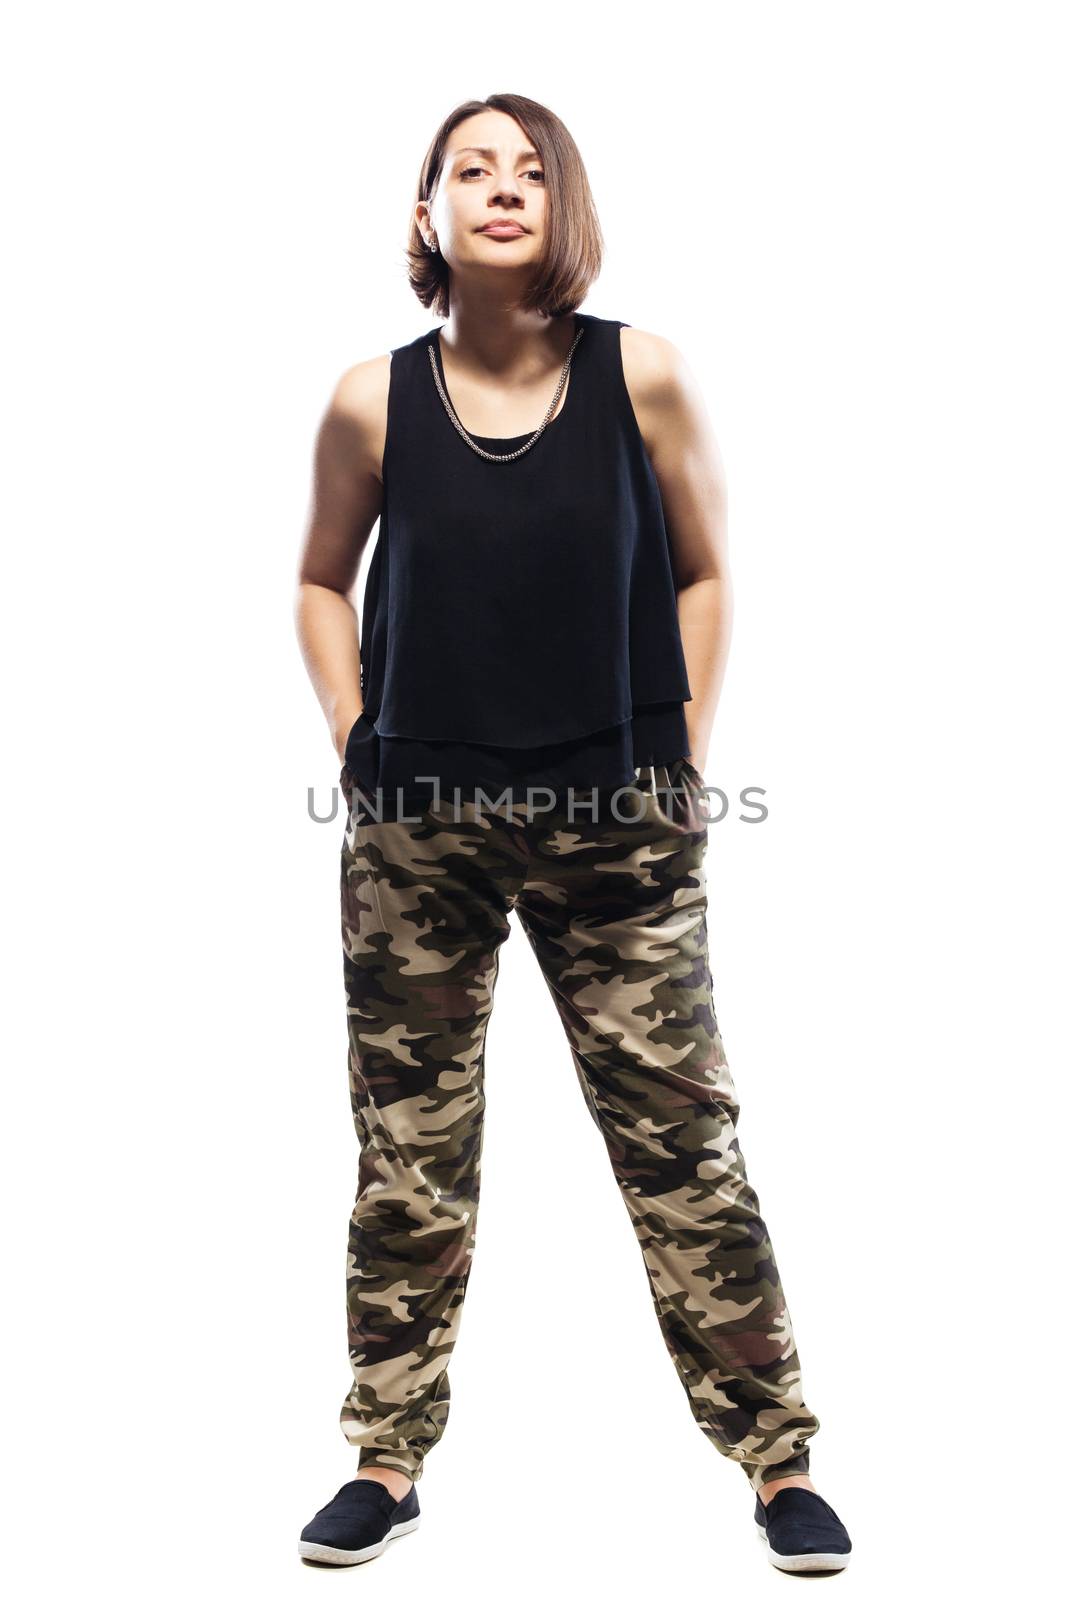 girl in camouflage pants by kokimk